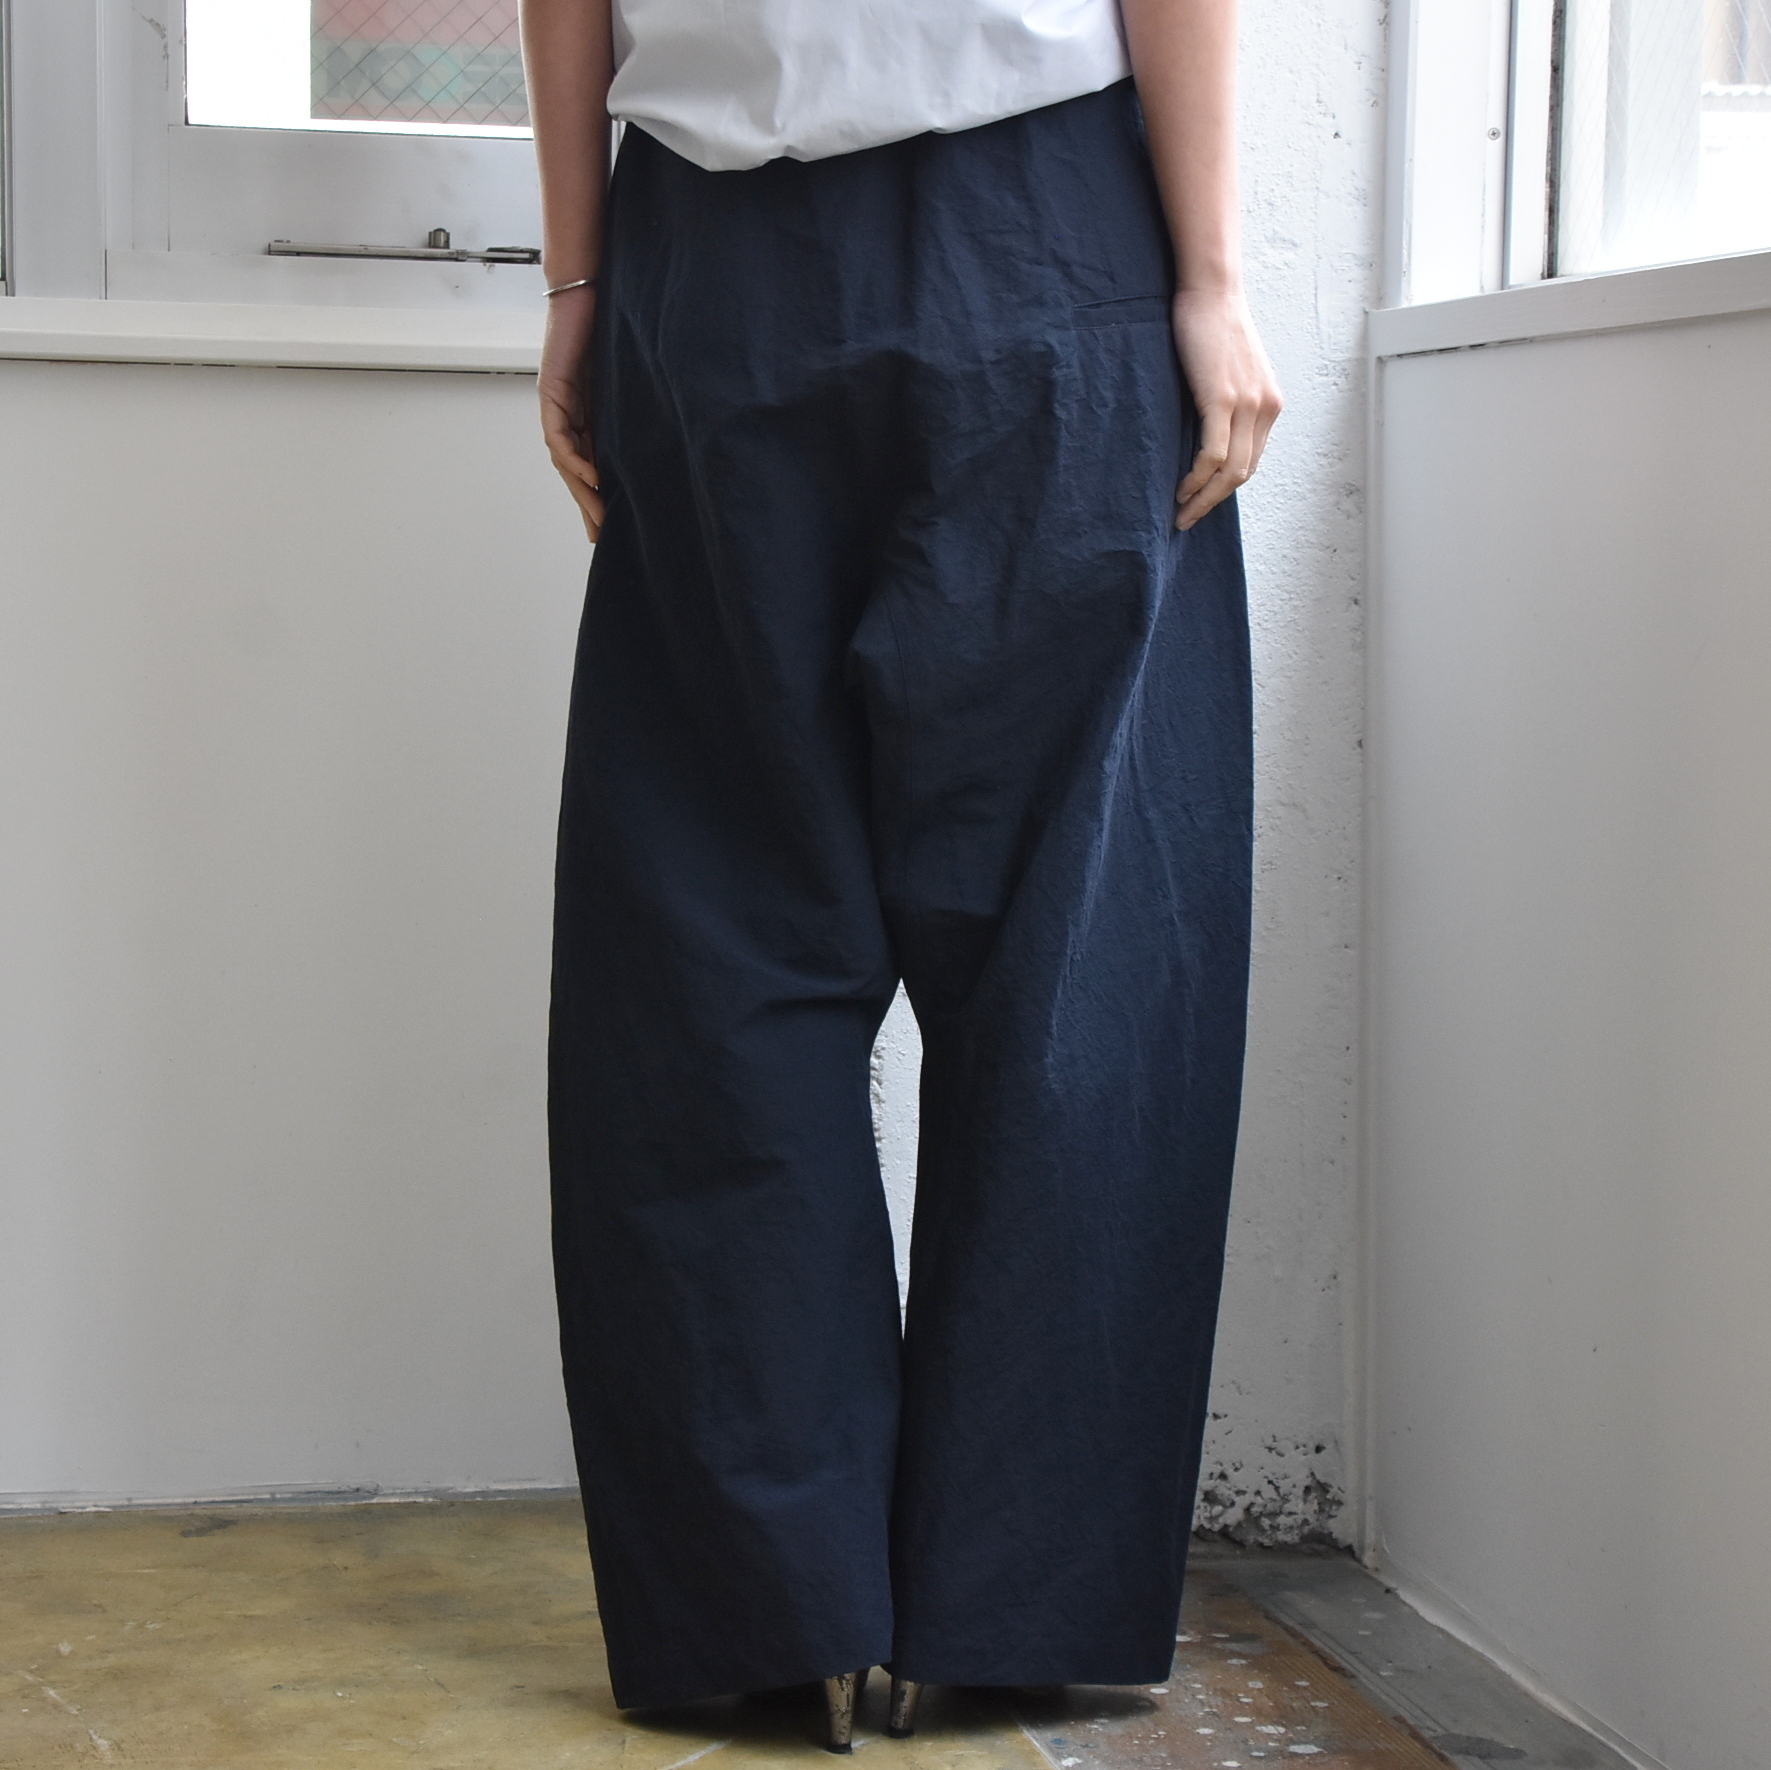 SOFIE D'HOORE(\tB[h[) / Relaxed extra low crotch pantsy2FWJz#PLOF-AA(6)